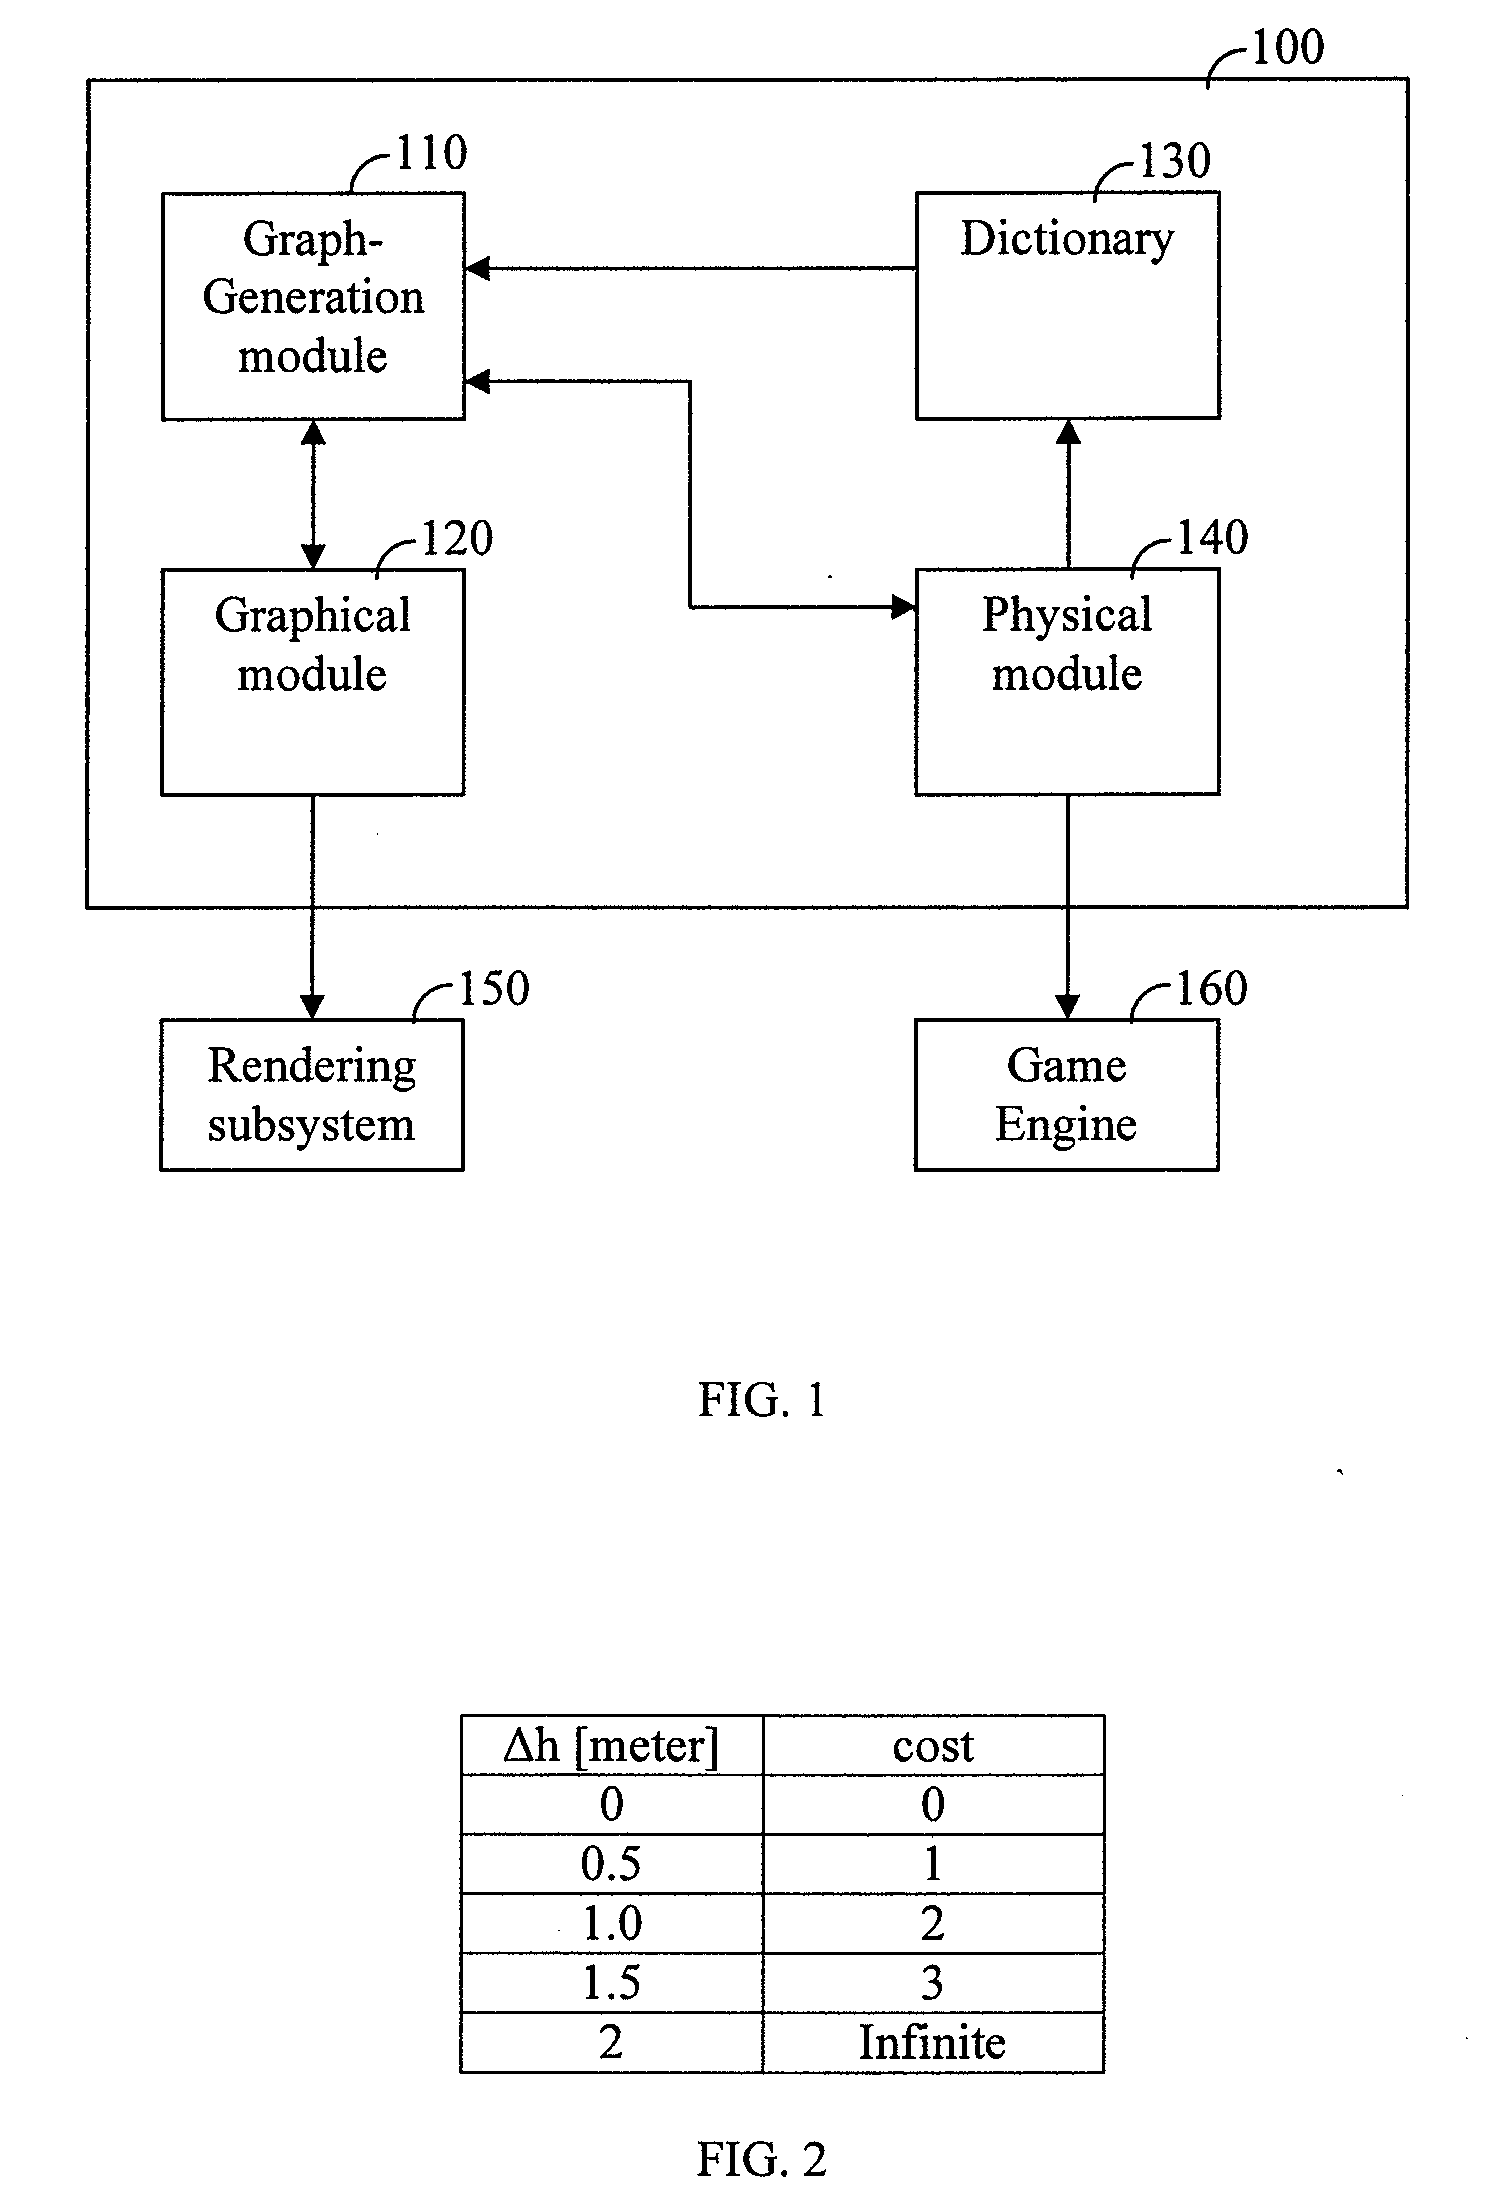 System and method for the generation of navigation graphs in real-time